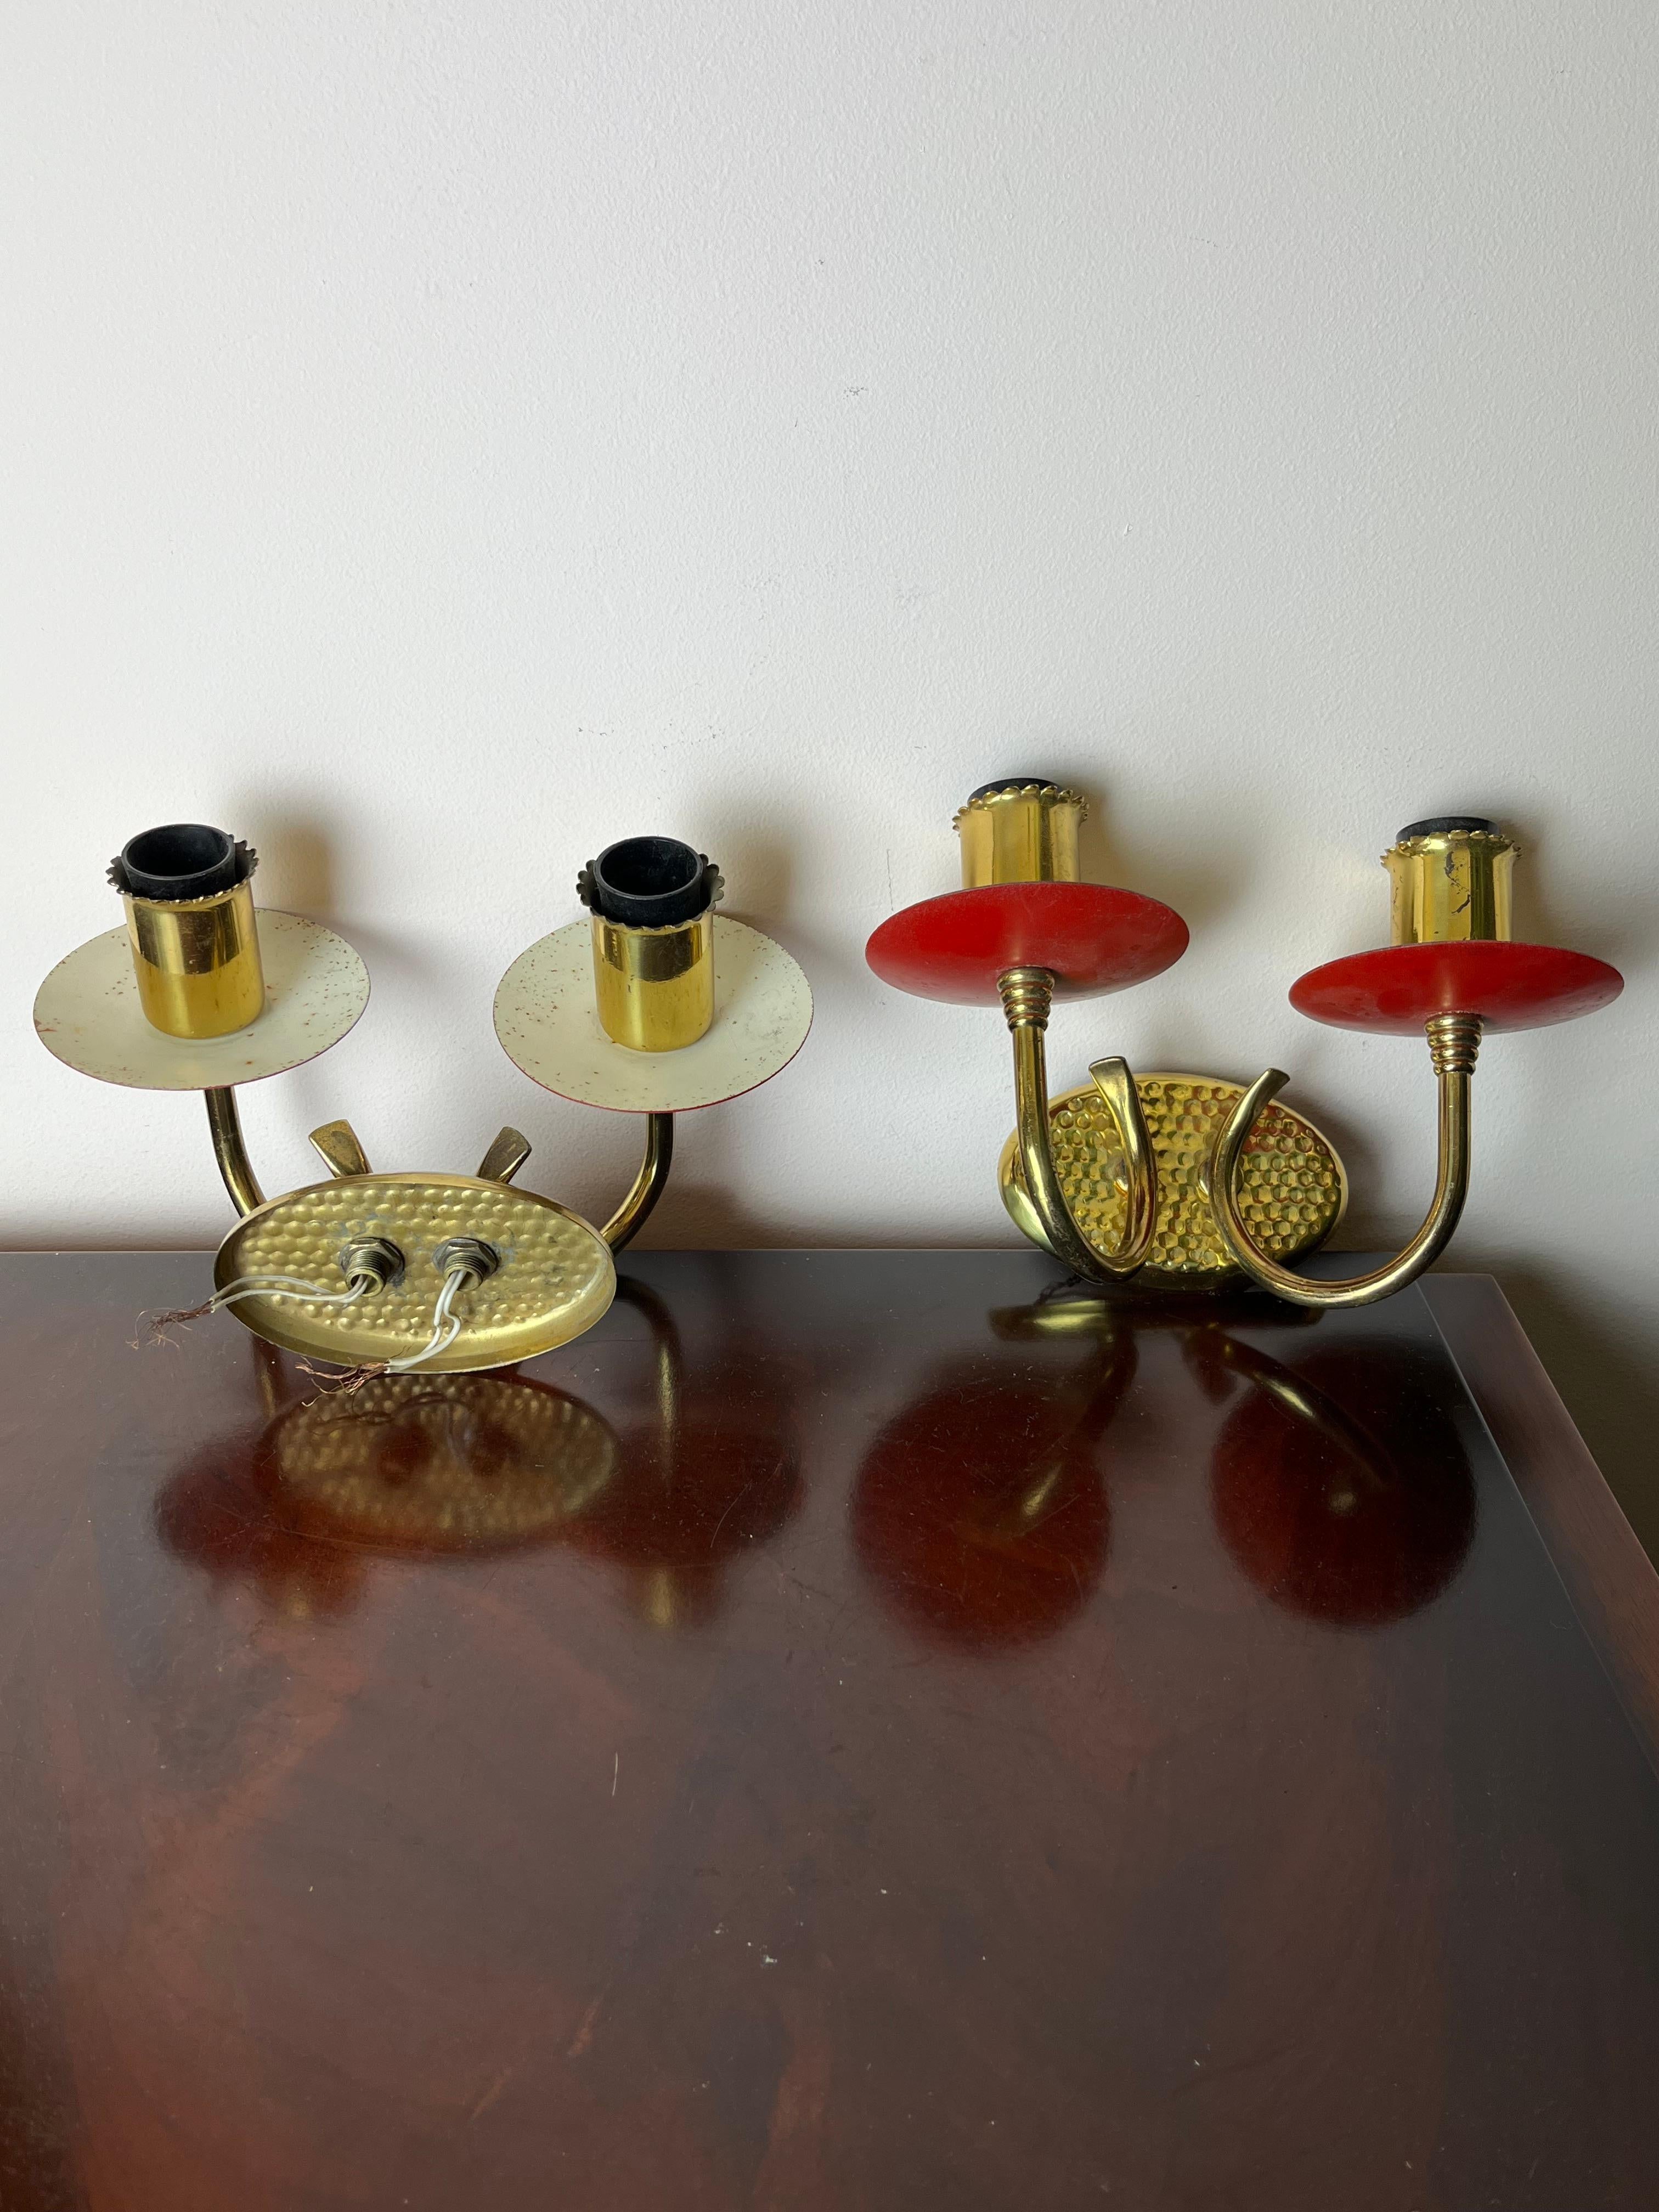 Set of 2 Wall Lamps in Brass and Colored Aluminium, Made in Italy, 1950s For Sale 3